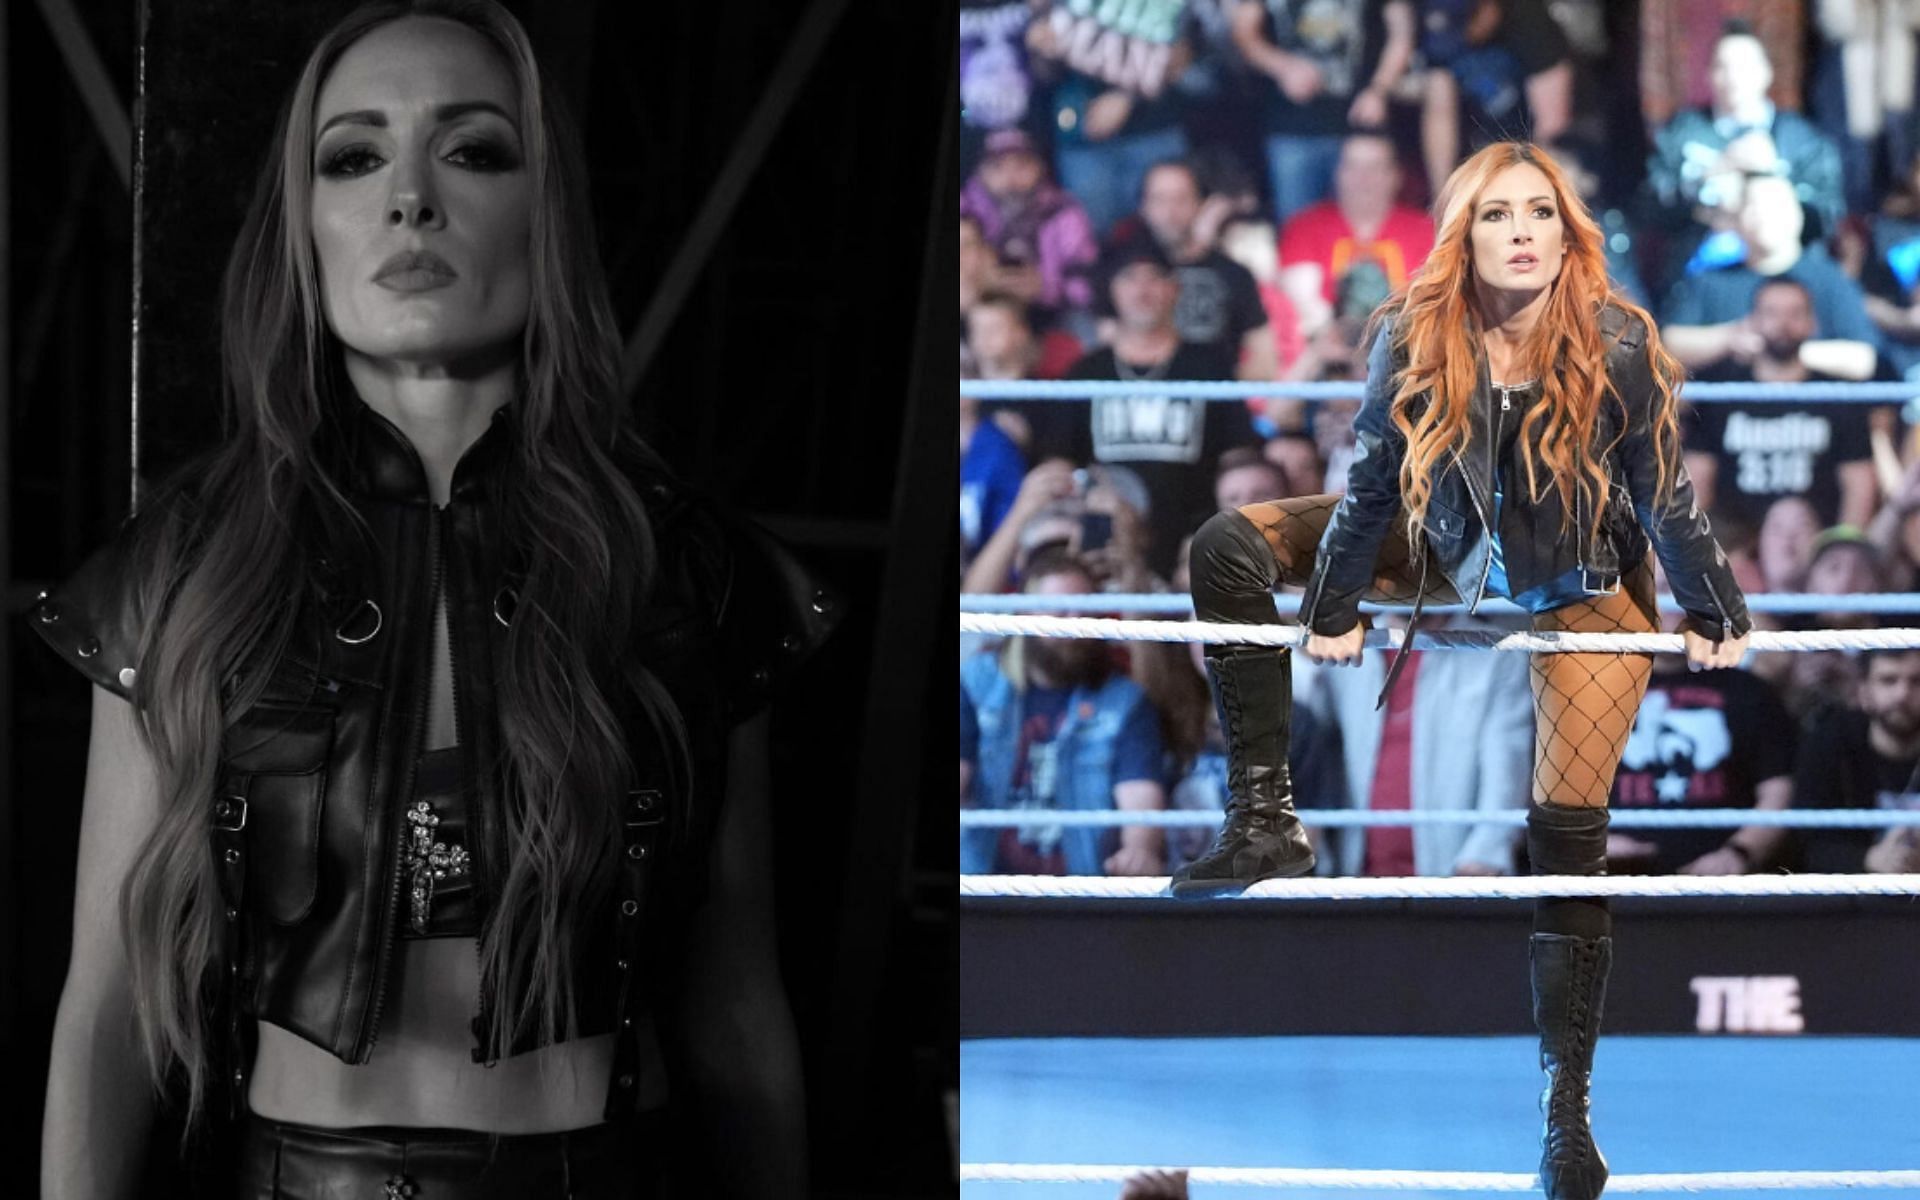 Becky Lynch is a major contributor to the WWE women